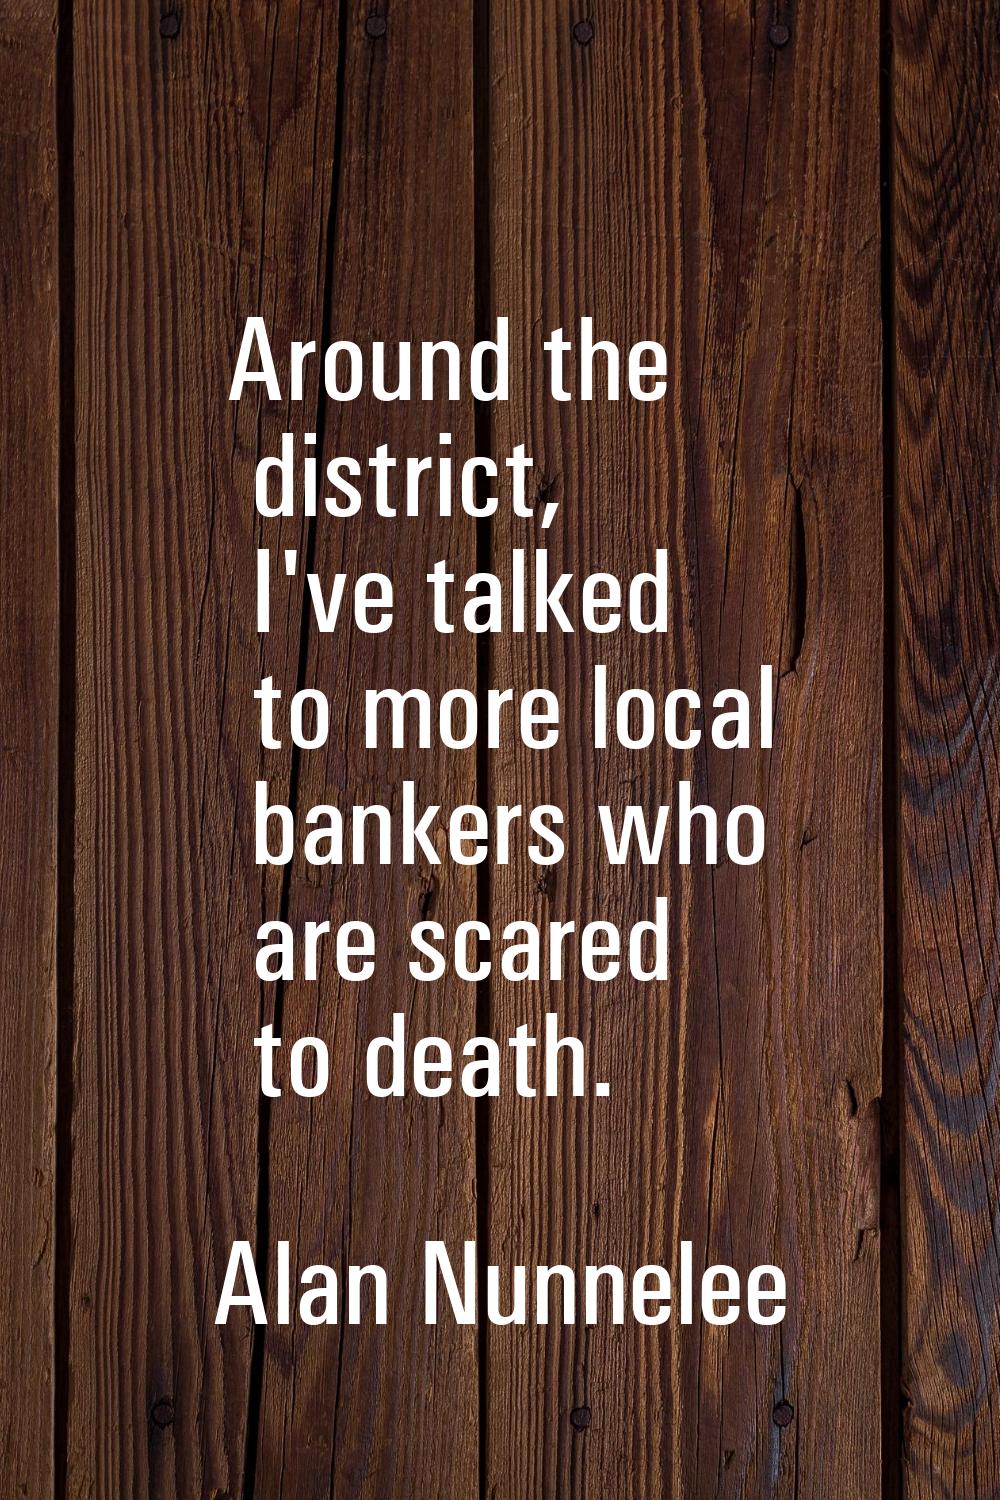 Around the district, I've talked to more local bankers who are scared to death.